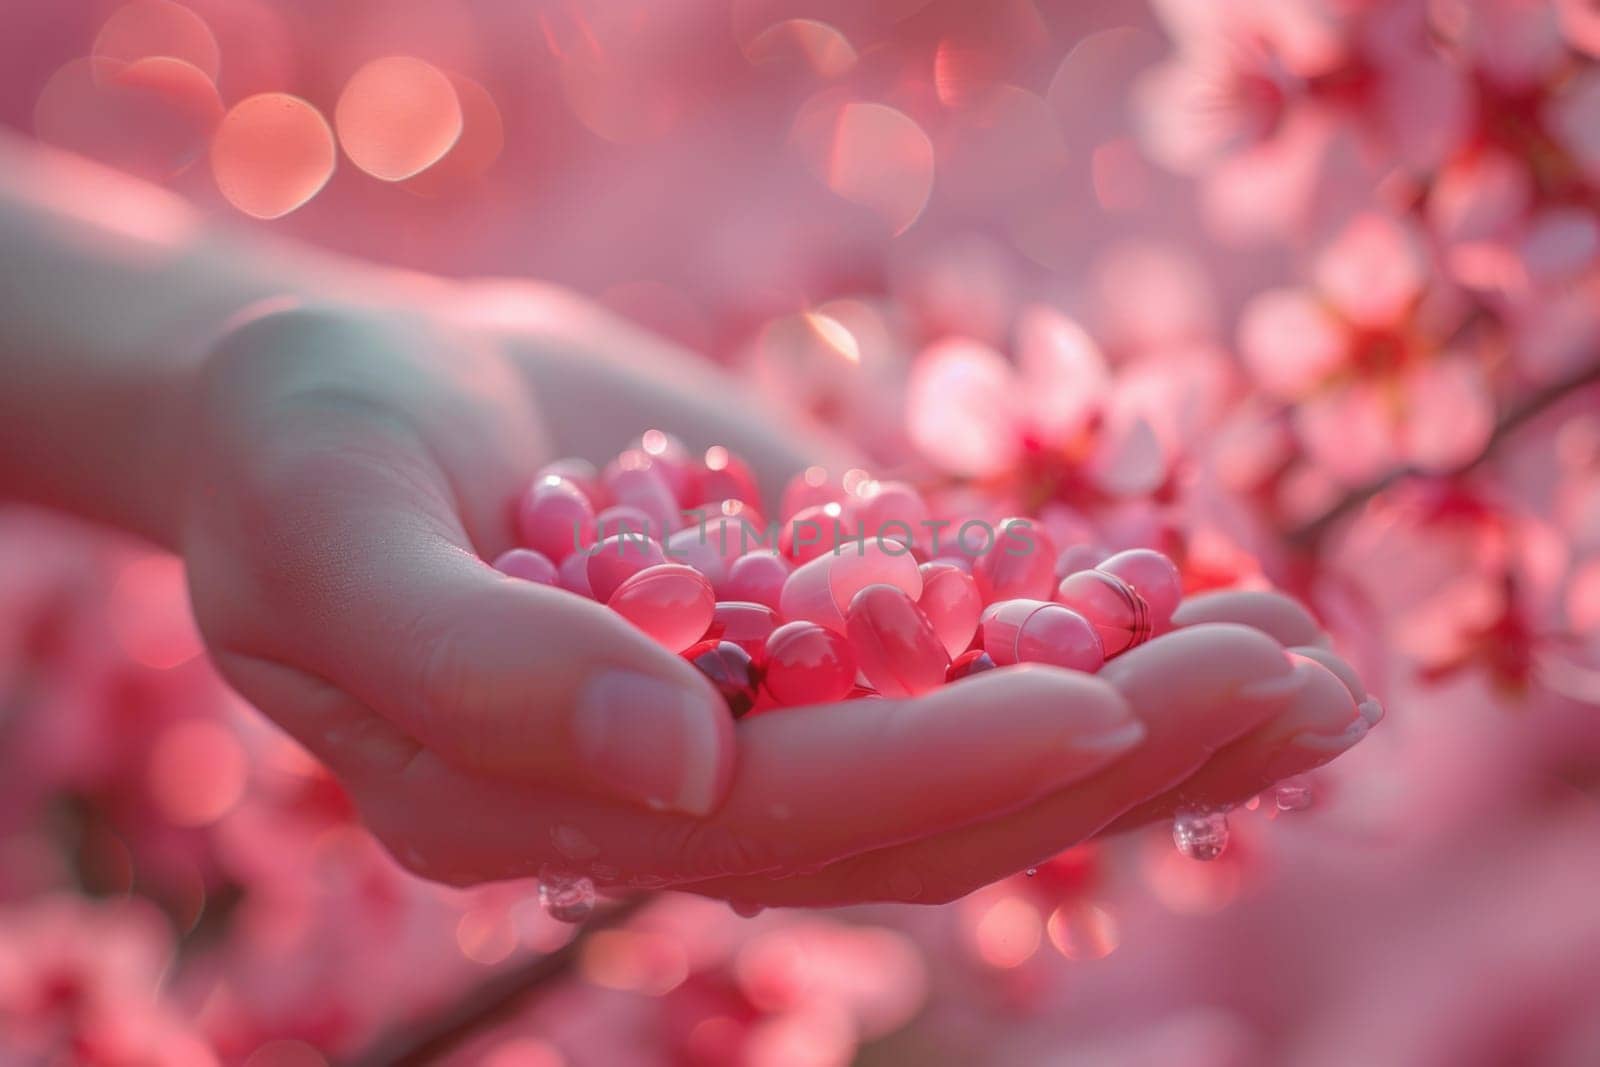 A close-up shot of a persons hands holding a bunch of small pink flowers.